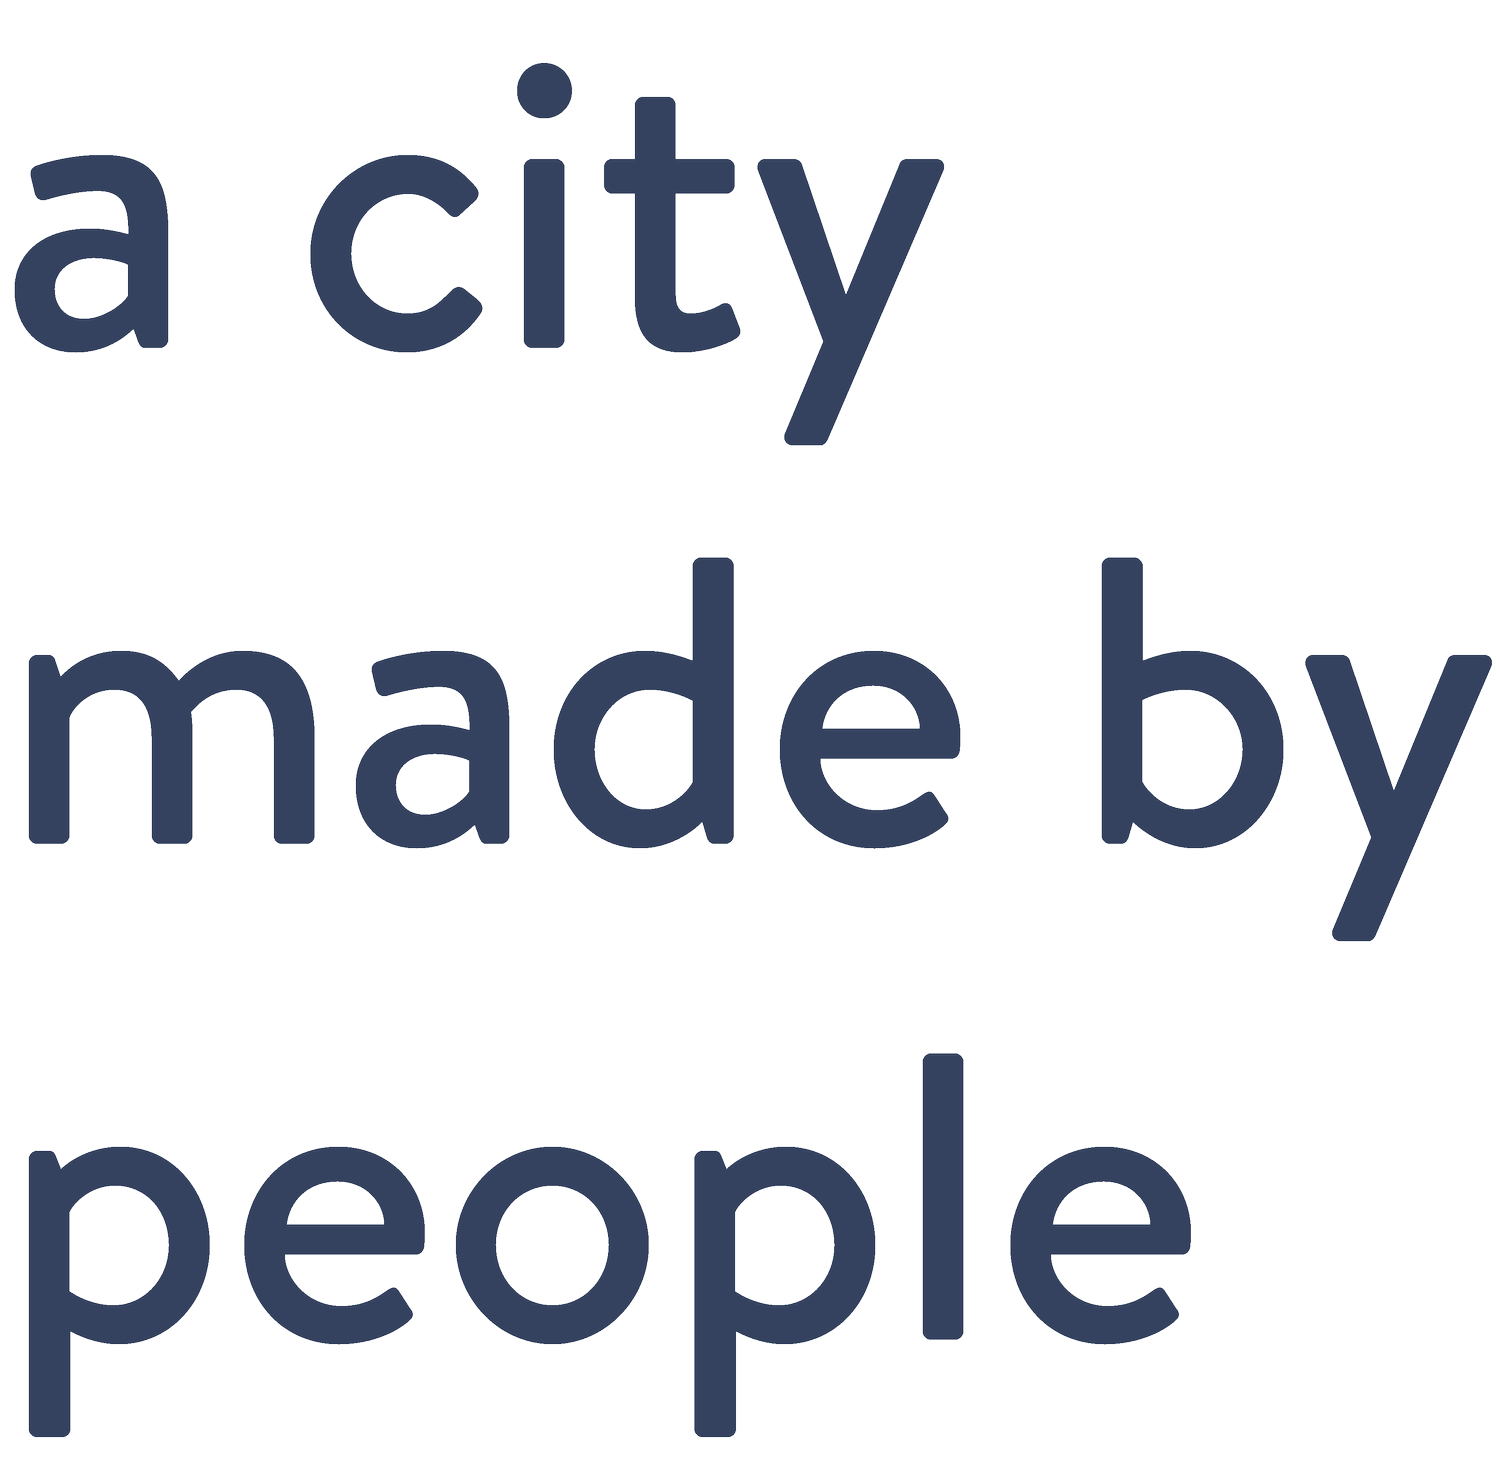 A CITY MADE BY PEOPLE